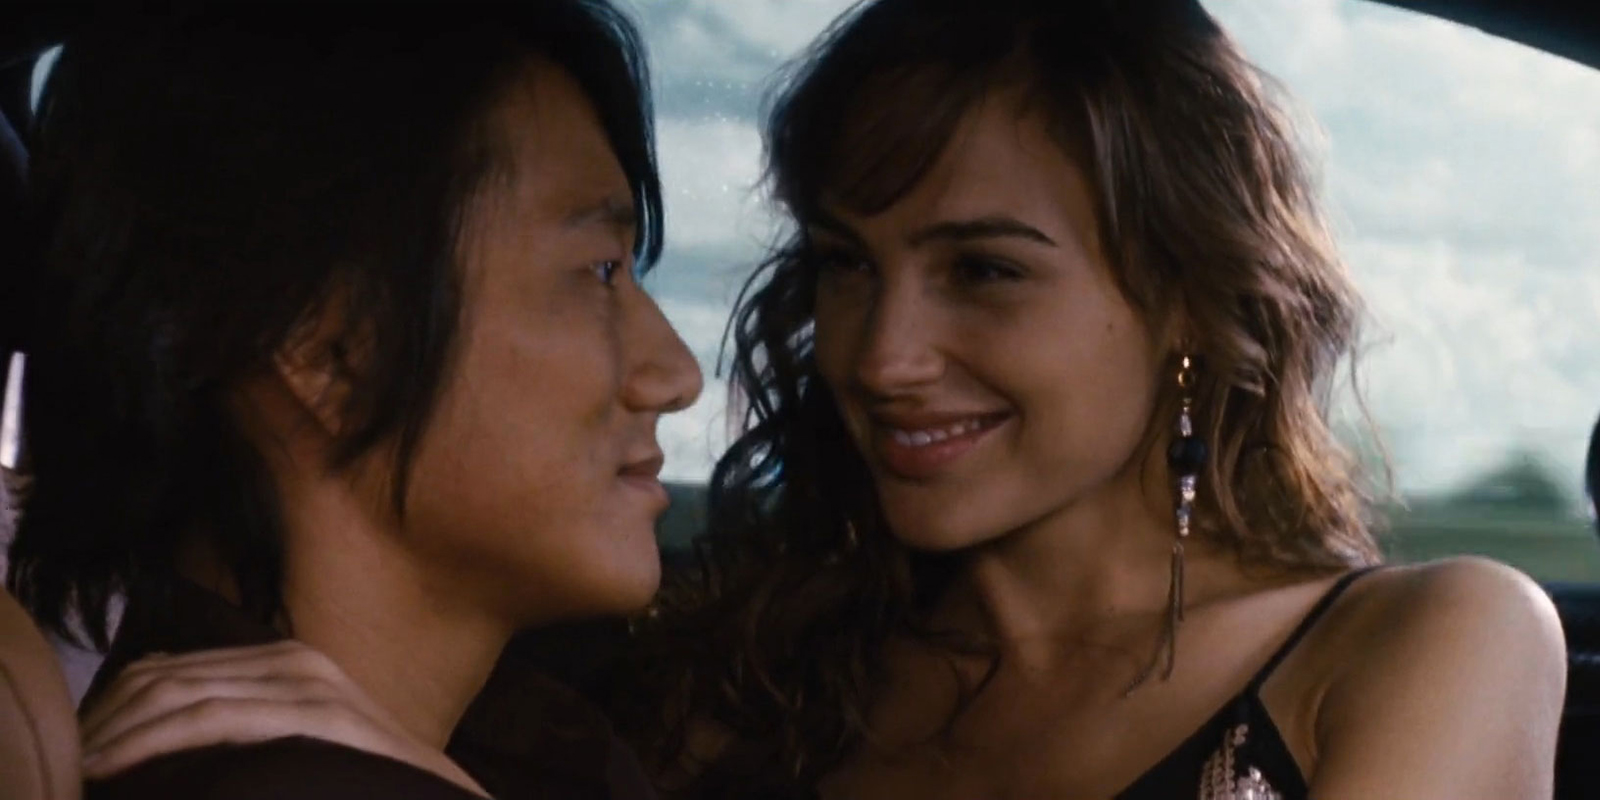 Sun-Kang-and-Gal-Gadot-as-Han-and-Gisele-in-Fast-Five.jpg